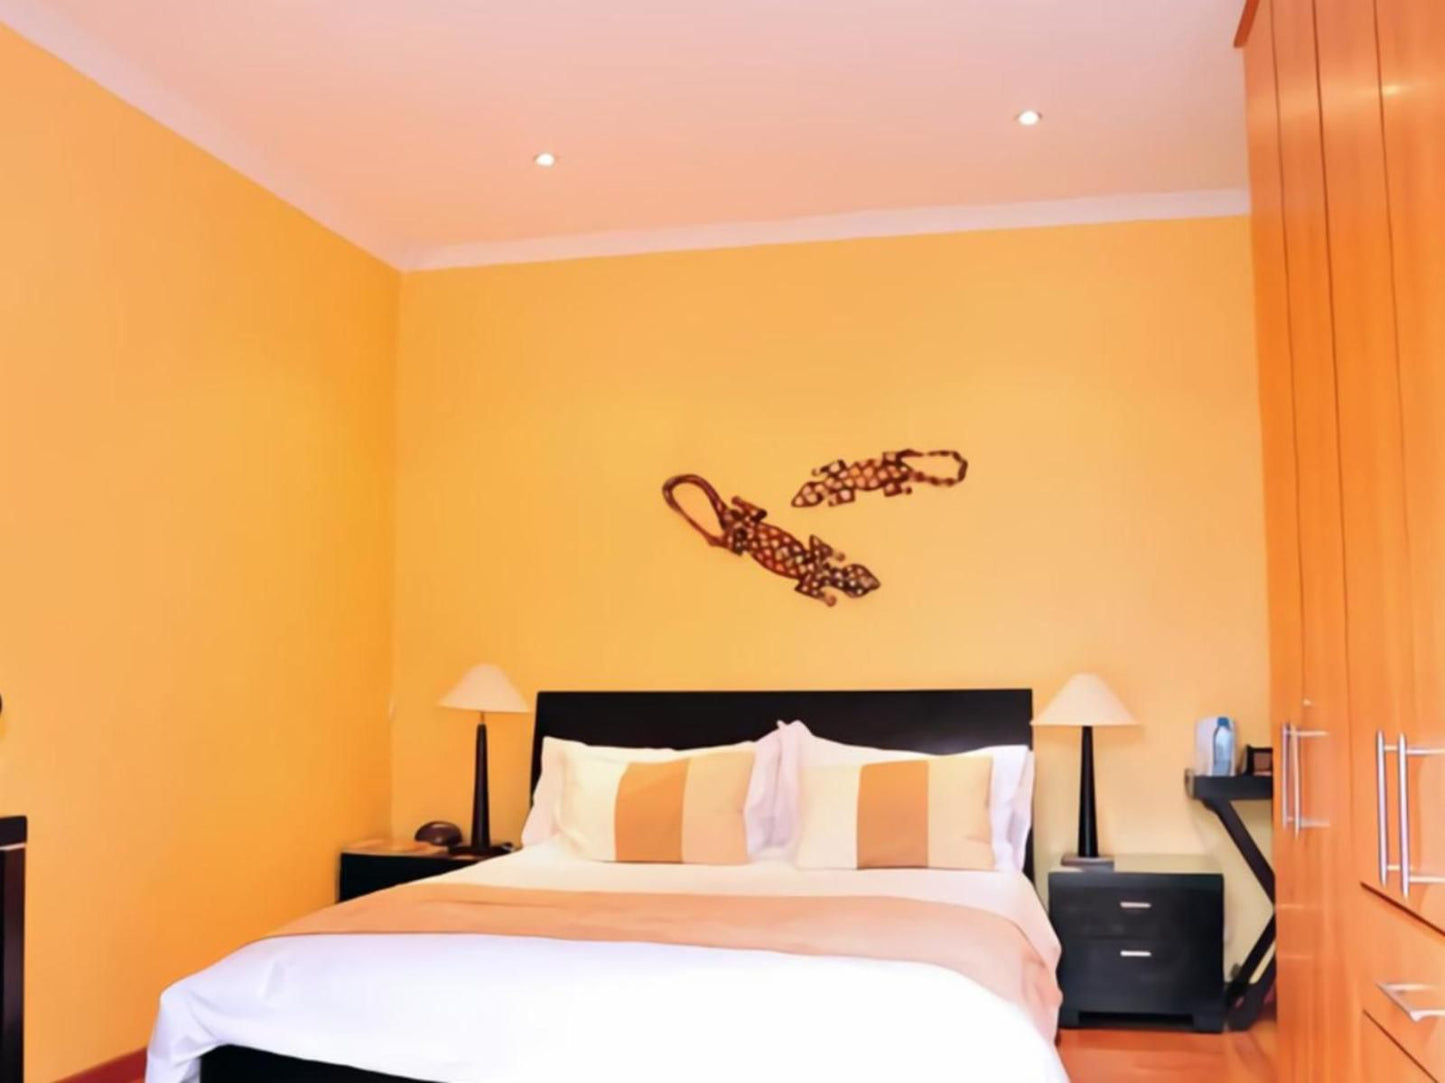 Mandalay Guest House Bloubergstrand Blouberg Western Cape South Africa Colorful, Bedroom